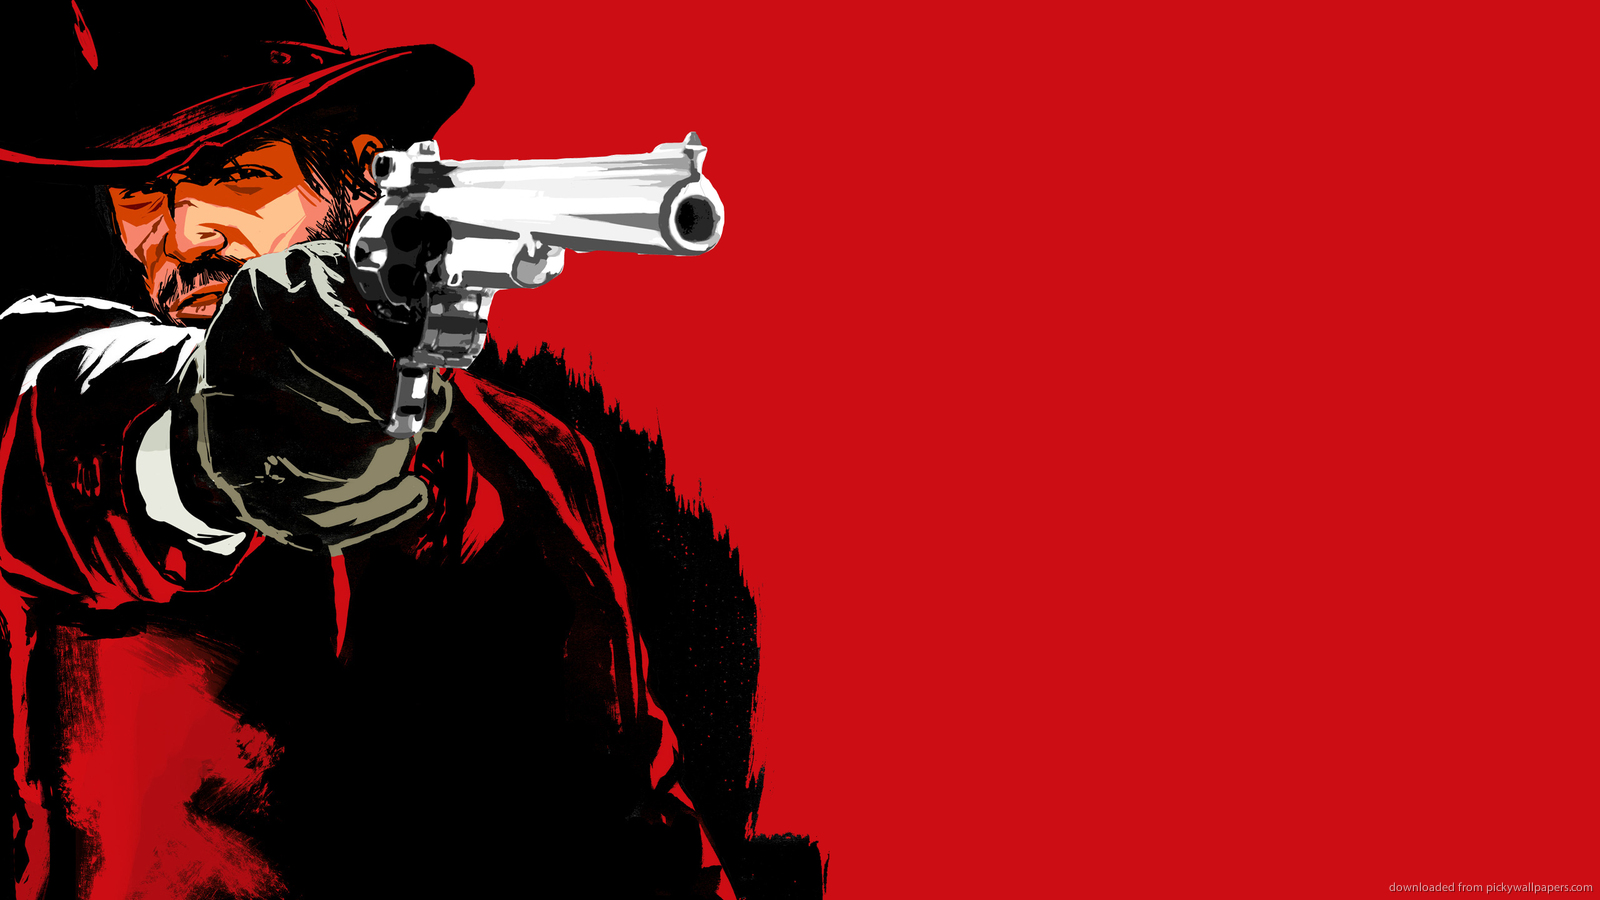 Rdr John Marston With Gun On A Red Background Wallpaper